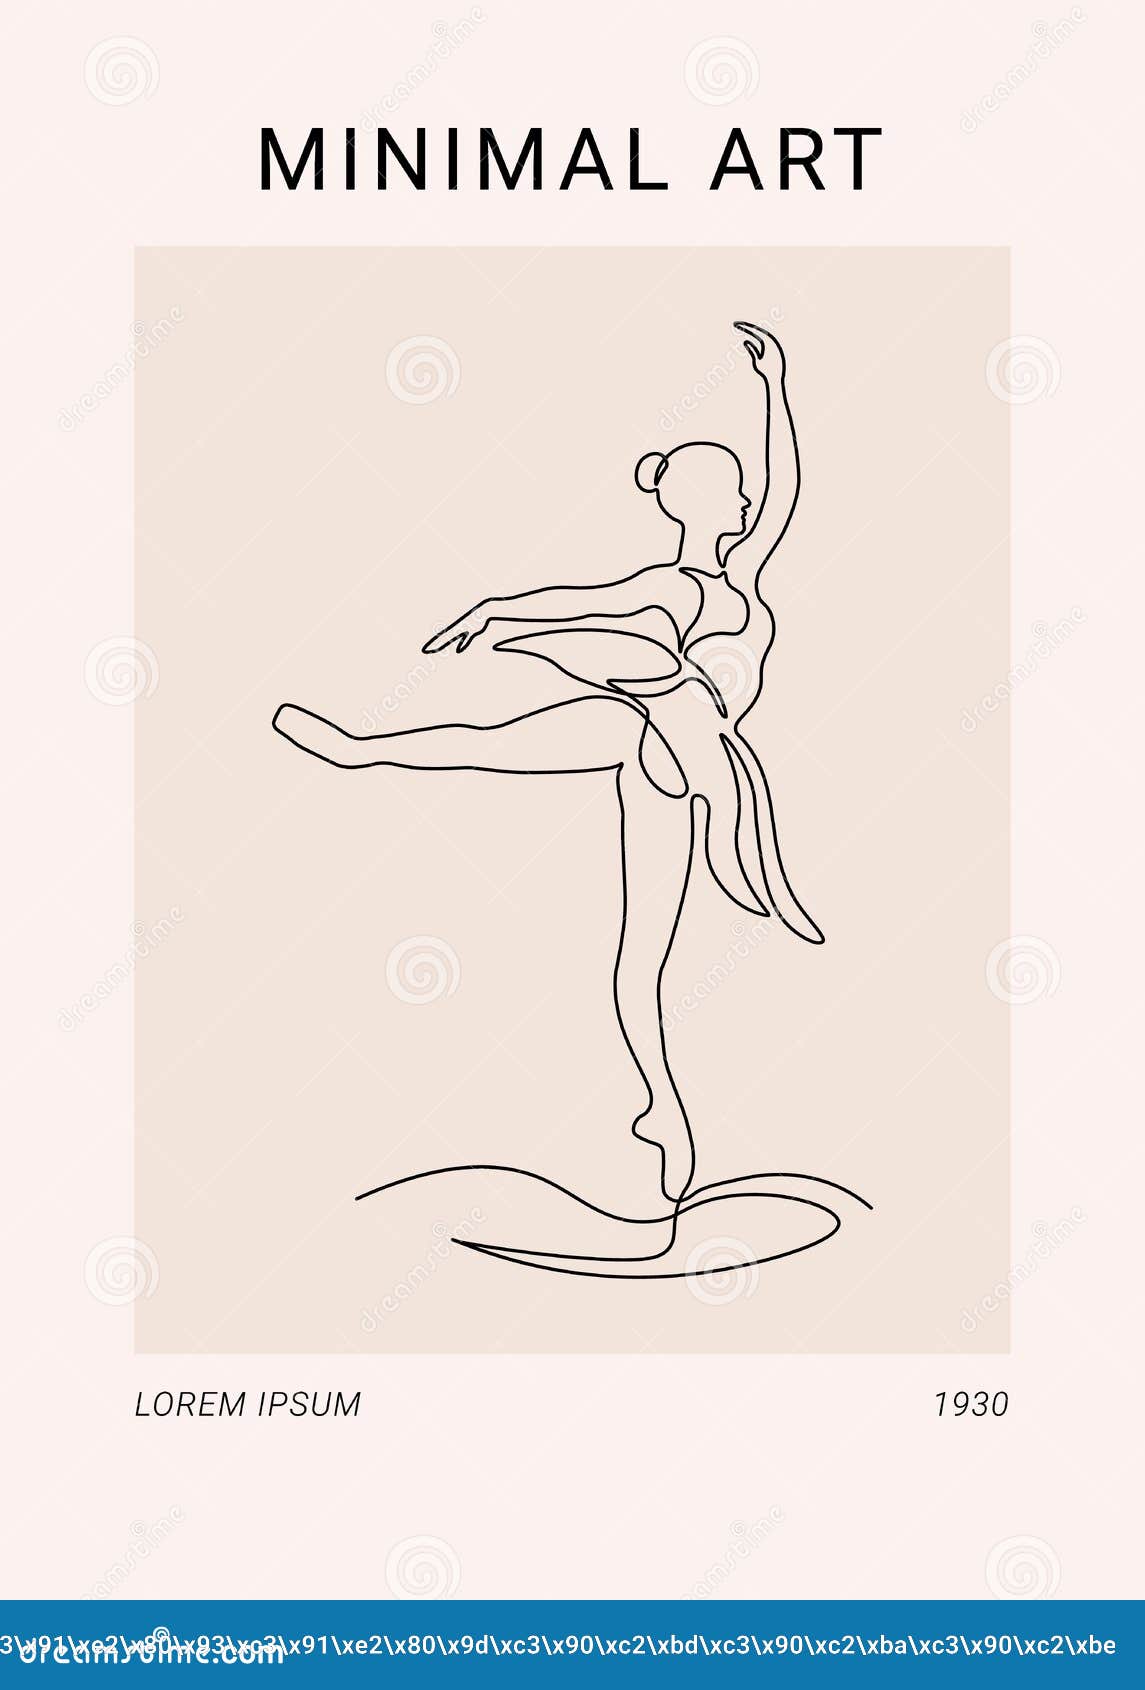 Ballerina One Line Drawing. Abstract Poster with Ballet in a Single Continuous Line Wall Art Vector Stock Vector - Illustration of beauty: 223500137